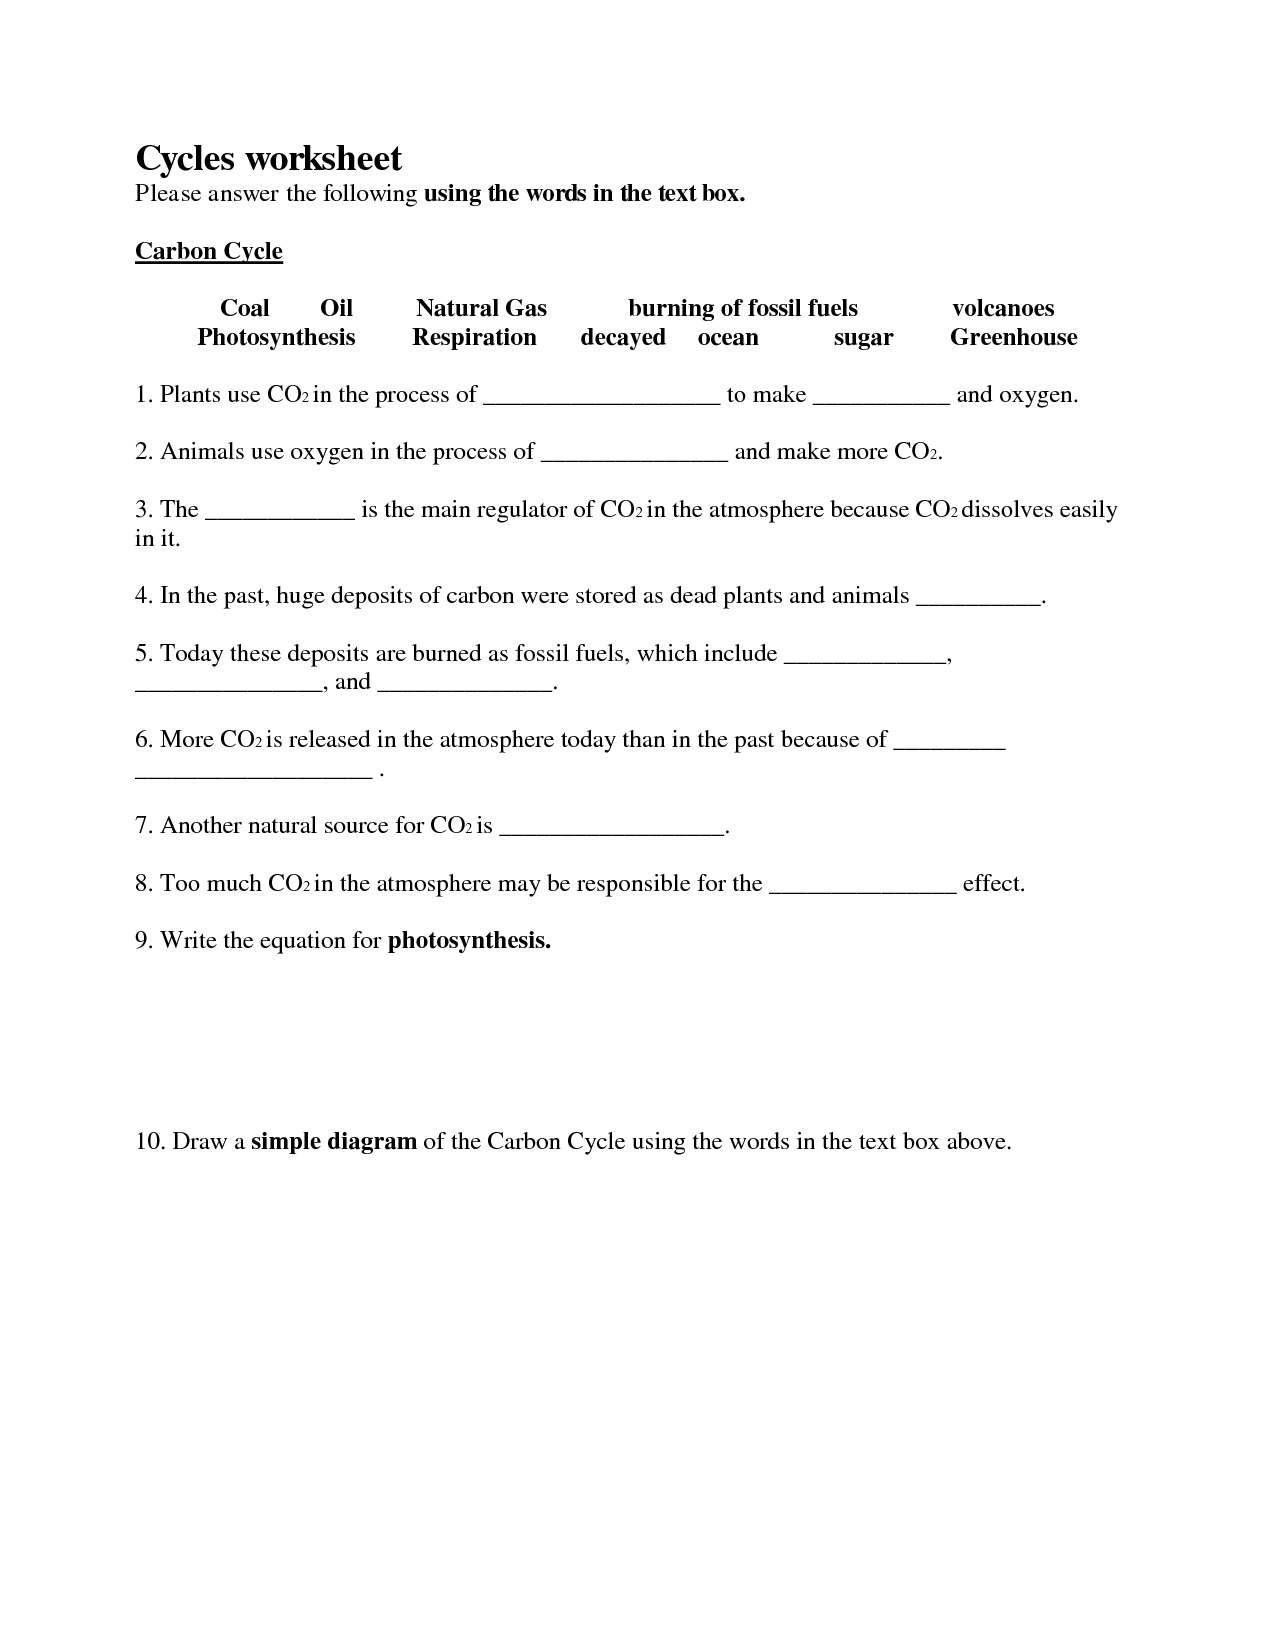 14-best-images-of-nitrogen-cycle-worksheet-answer-key-carbon-cycle